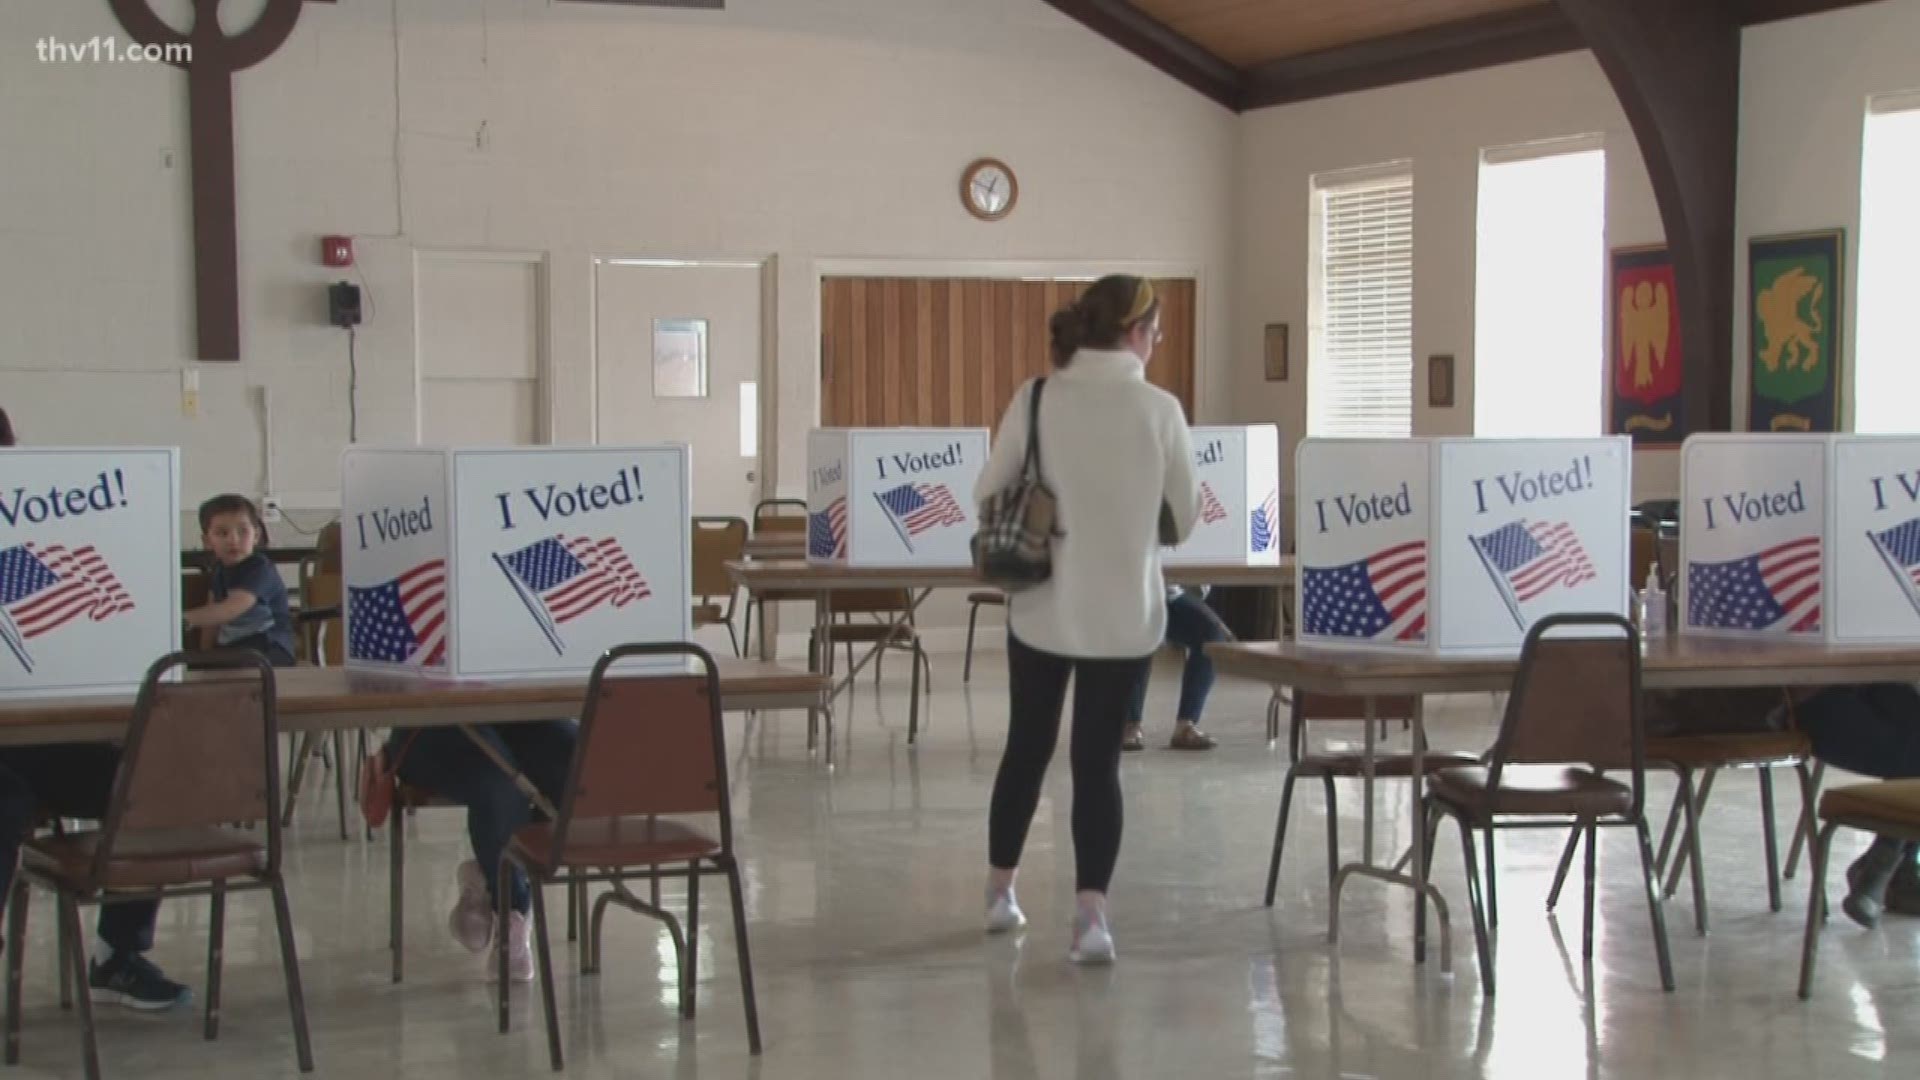 Thousands of voters showed up to the polls to cast their votes. Voters in Little Rock said they were in and out of the polling locations very quickly.